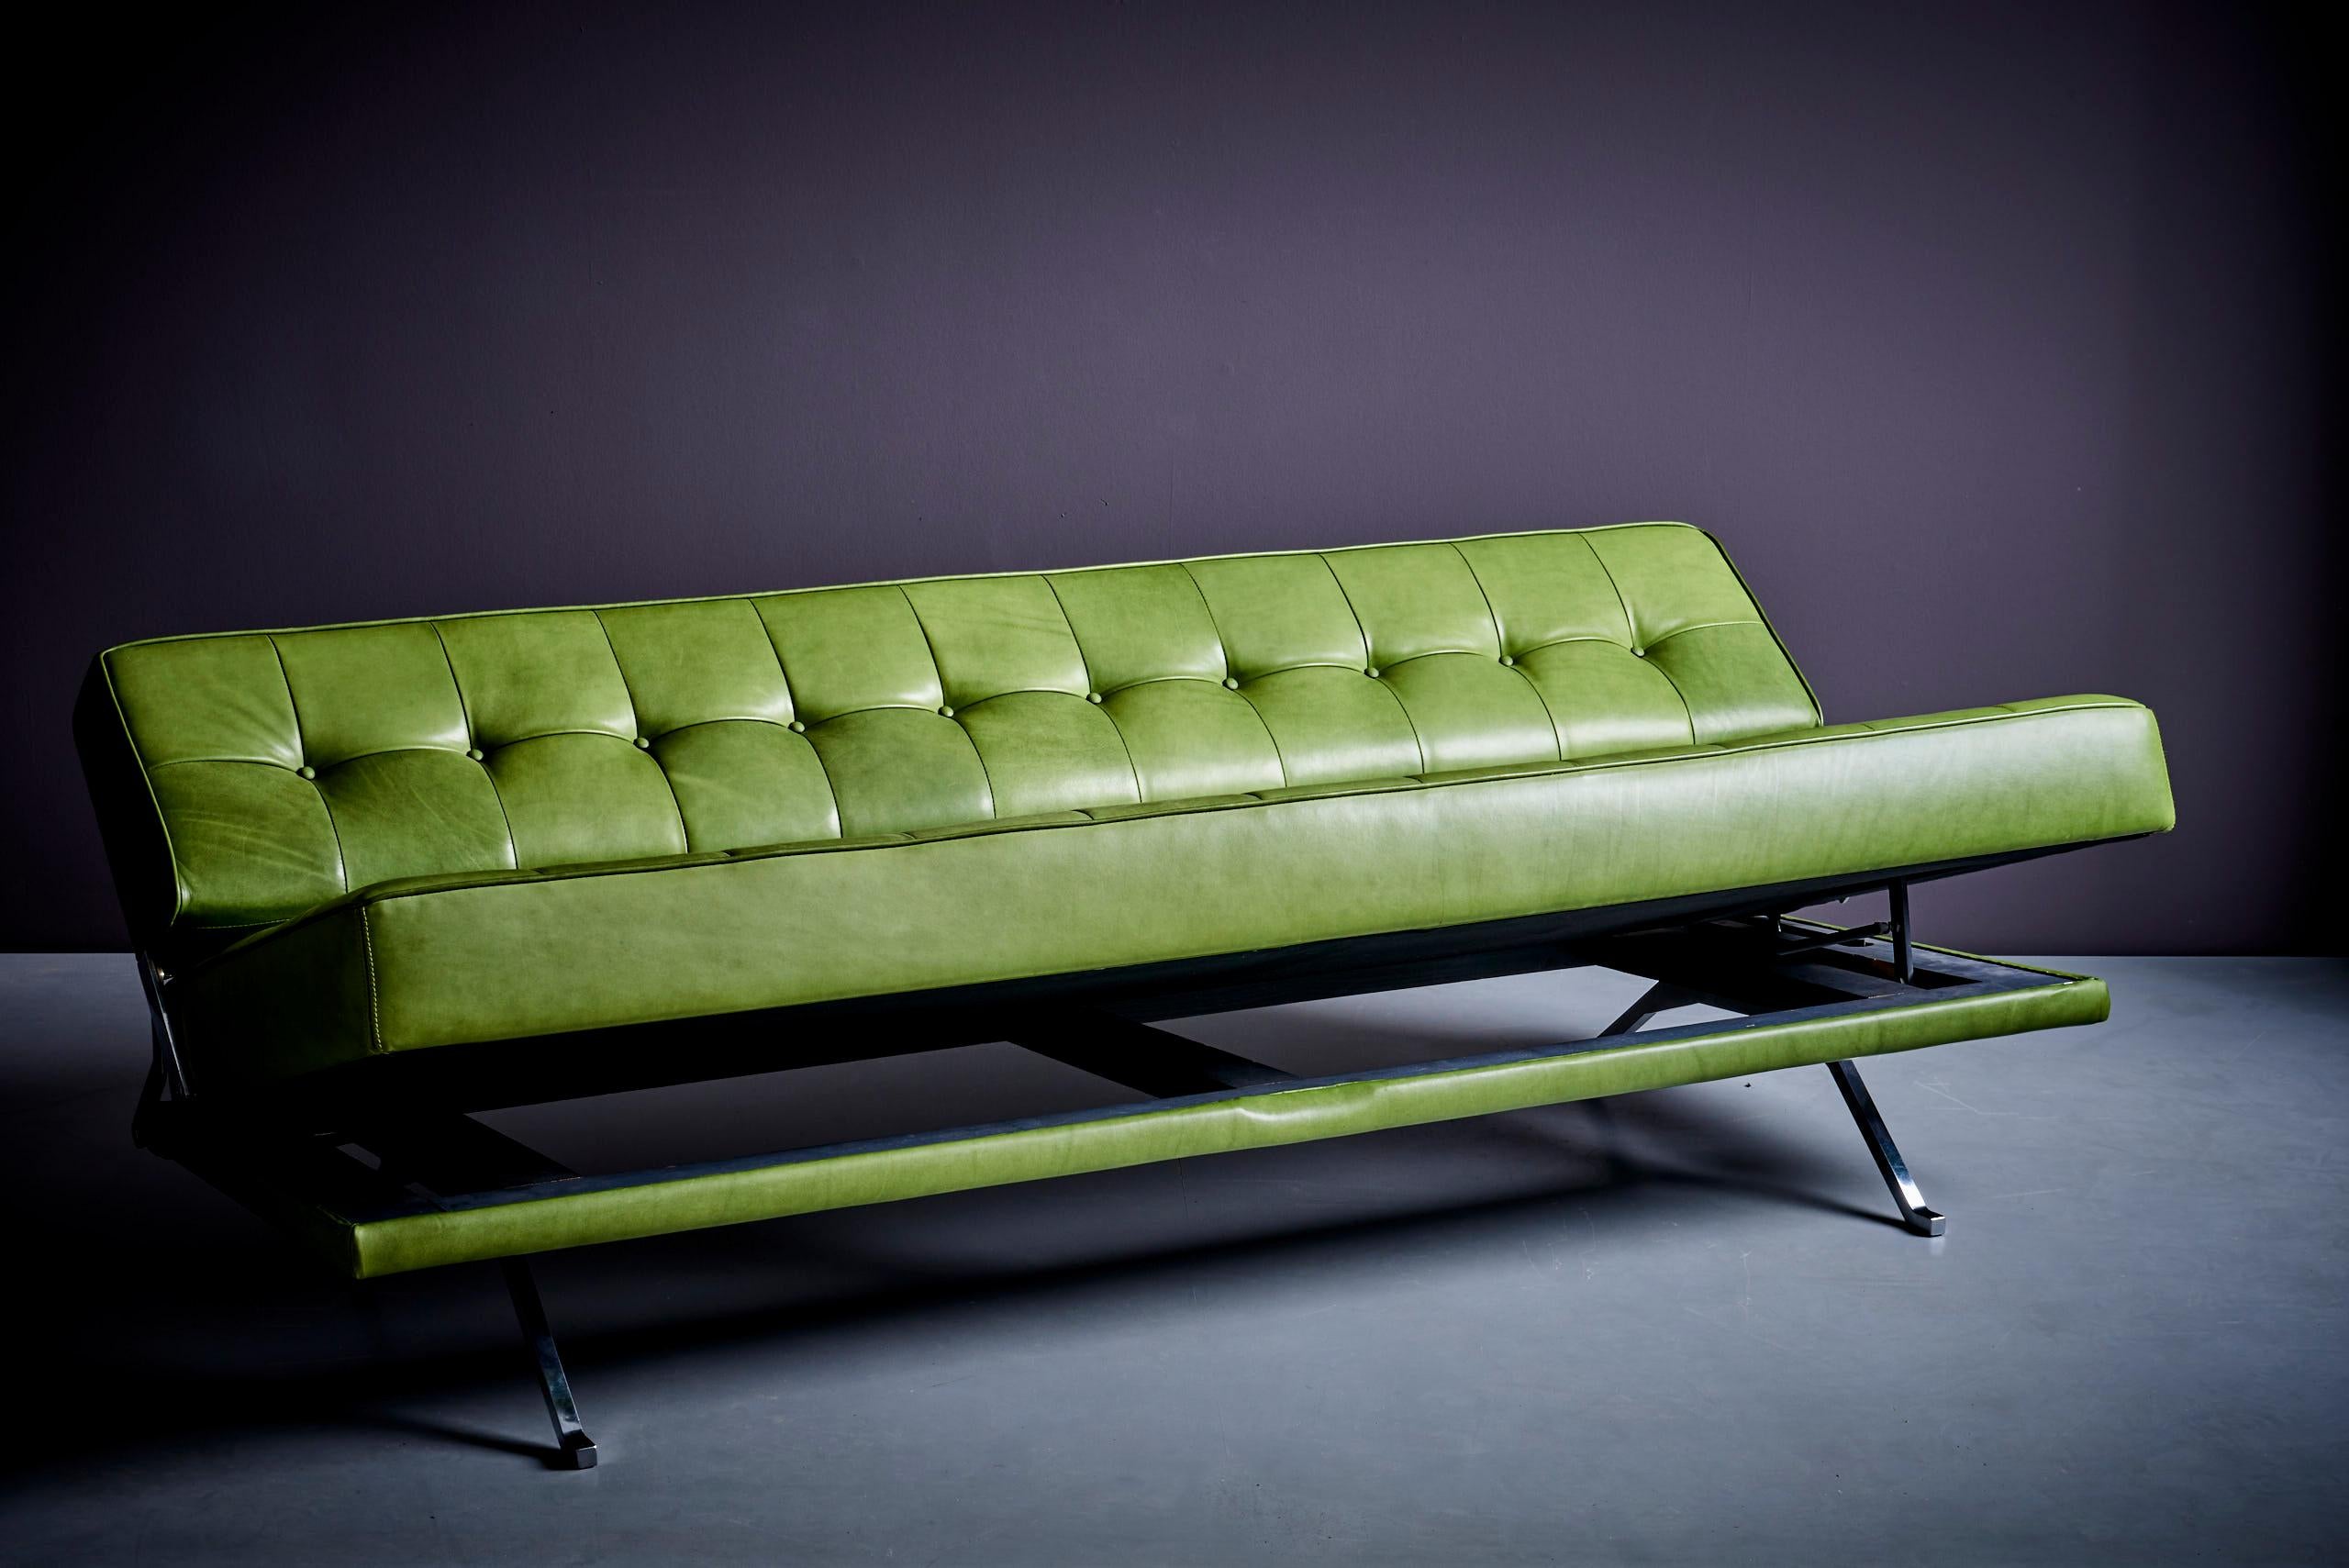 Excellent Johannes Spalt 'Constanze' daybed or sofa for Wittmann, Austria, 1960s. Newly upholstered in green Camo Leather. The pulled out version of the sofa measures 108cm in depth.